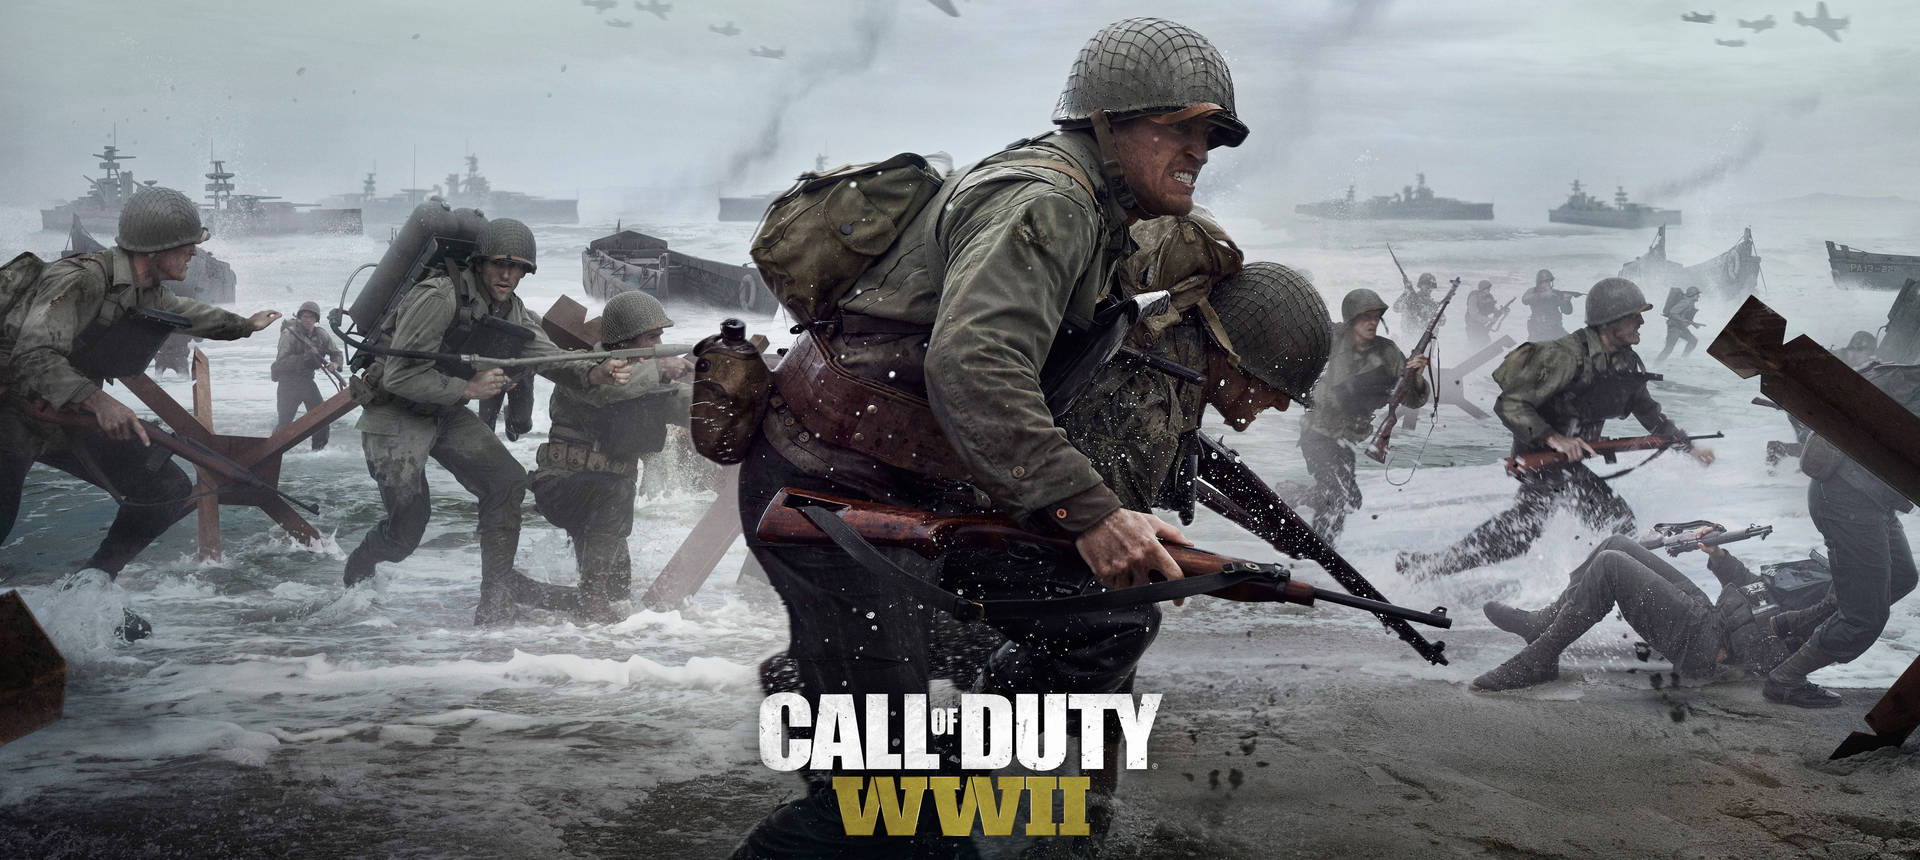 Call Of Duty WW2 Soldiers Wallpaper